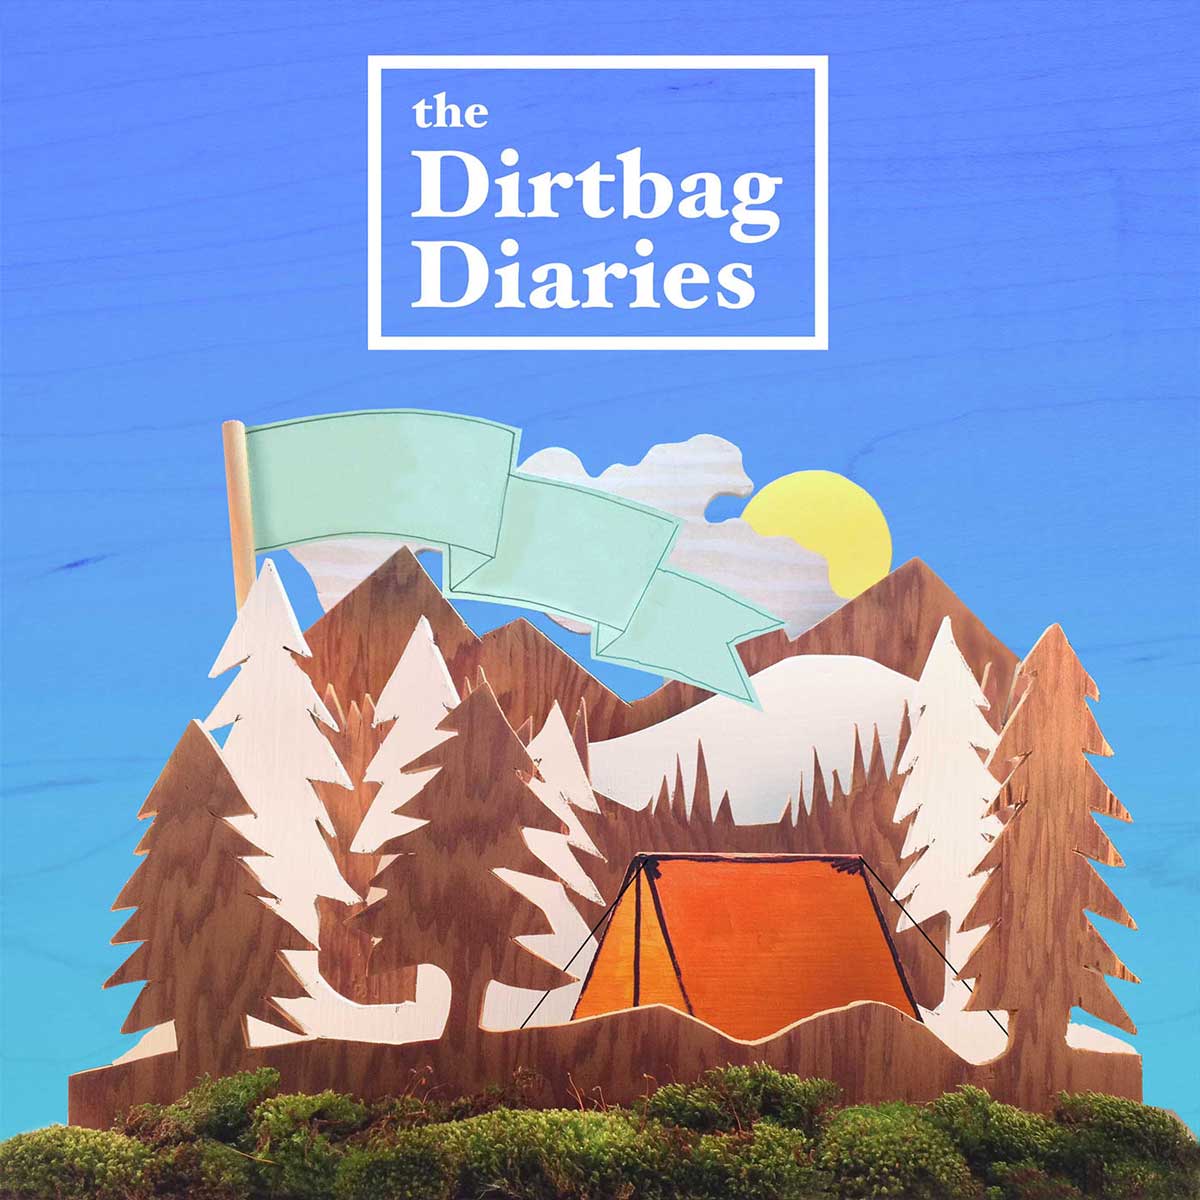 The Dirtbag Diaries Podcast Cover Art.